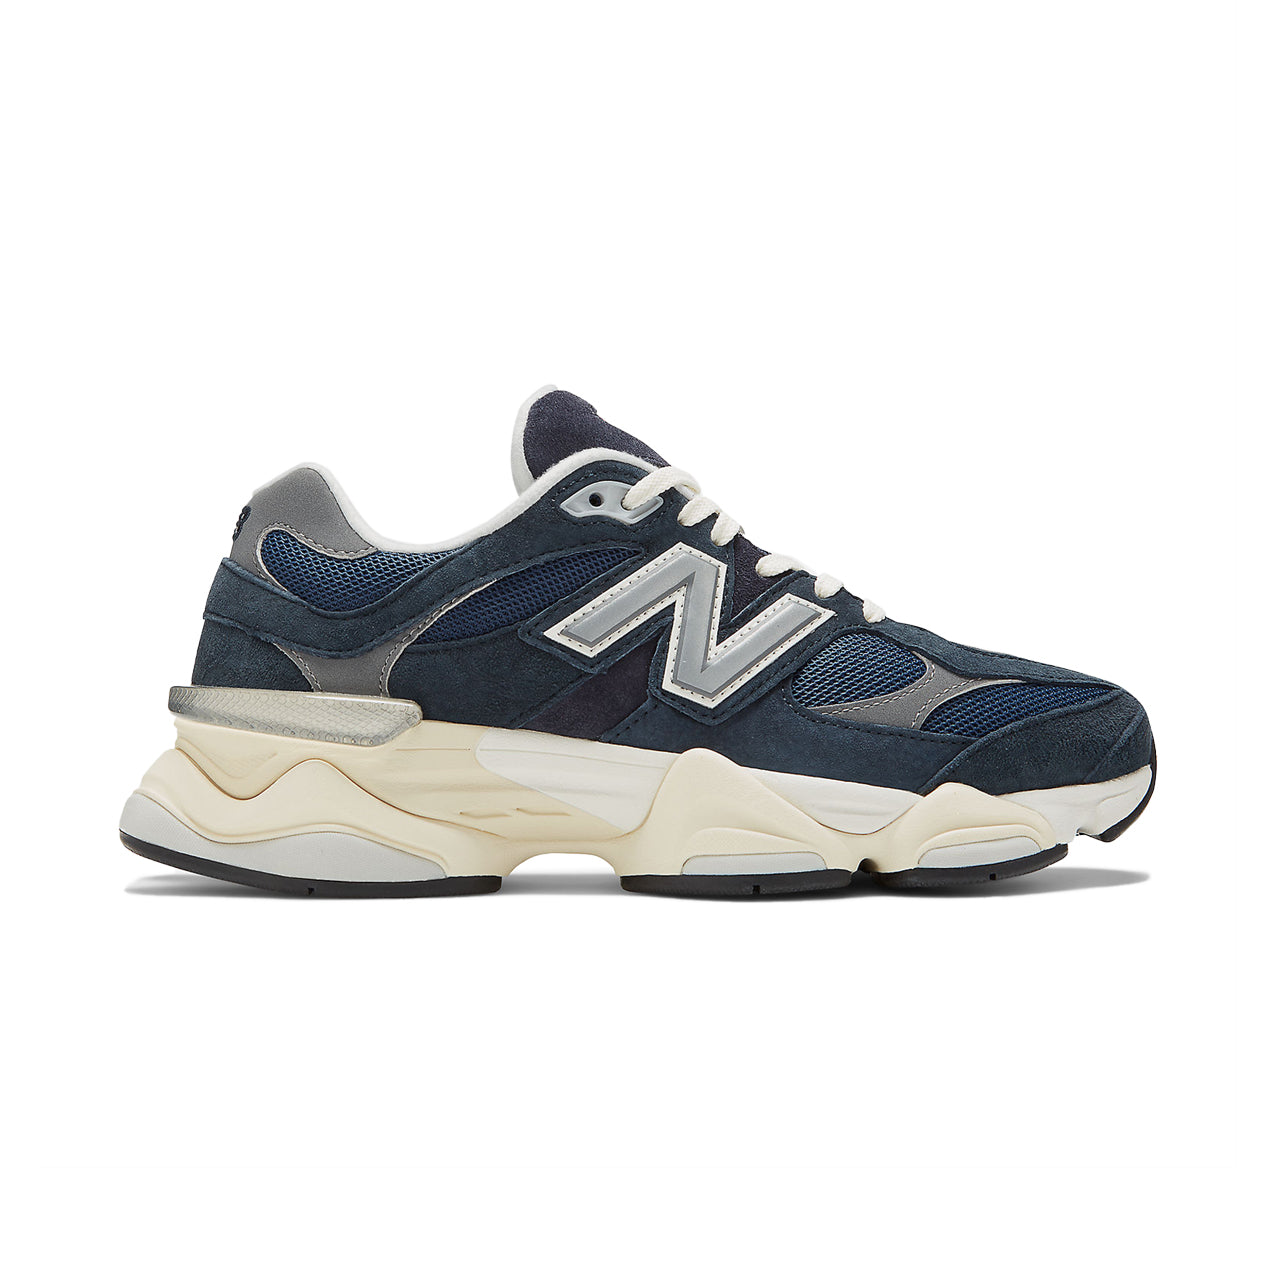 New Balance 9060 Outerspace Castlerock | Uncrate